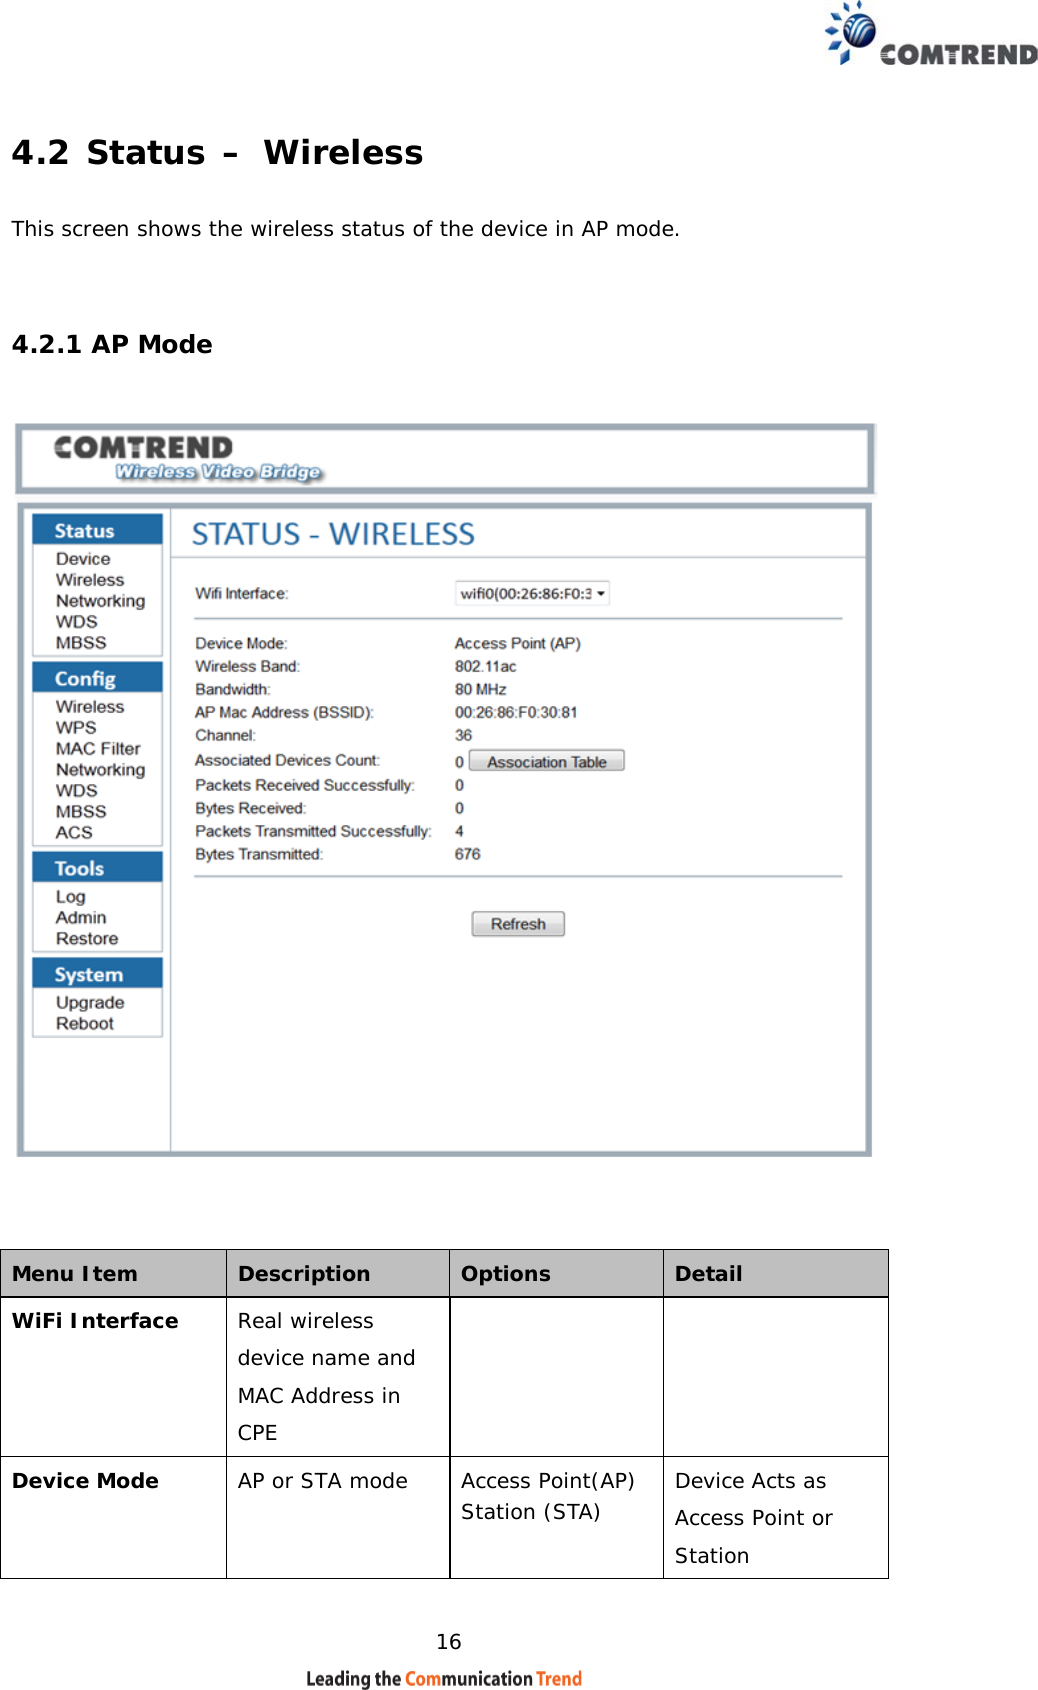    16 4.2 Status – Wireless  This screen shows the wireless status of the device in AP mode.   4.2.1 AP Mode      Menu Item  Description   Options   Detail  WiFi Interface Real wireless device name and MAC Address in CPE   Device Mode   AP or STA mode   Access Point(AP)  Station (STA) Device Acts as Access Point or Station 